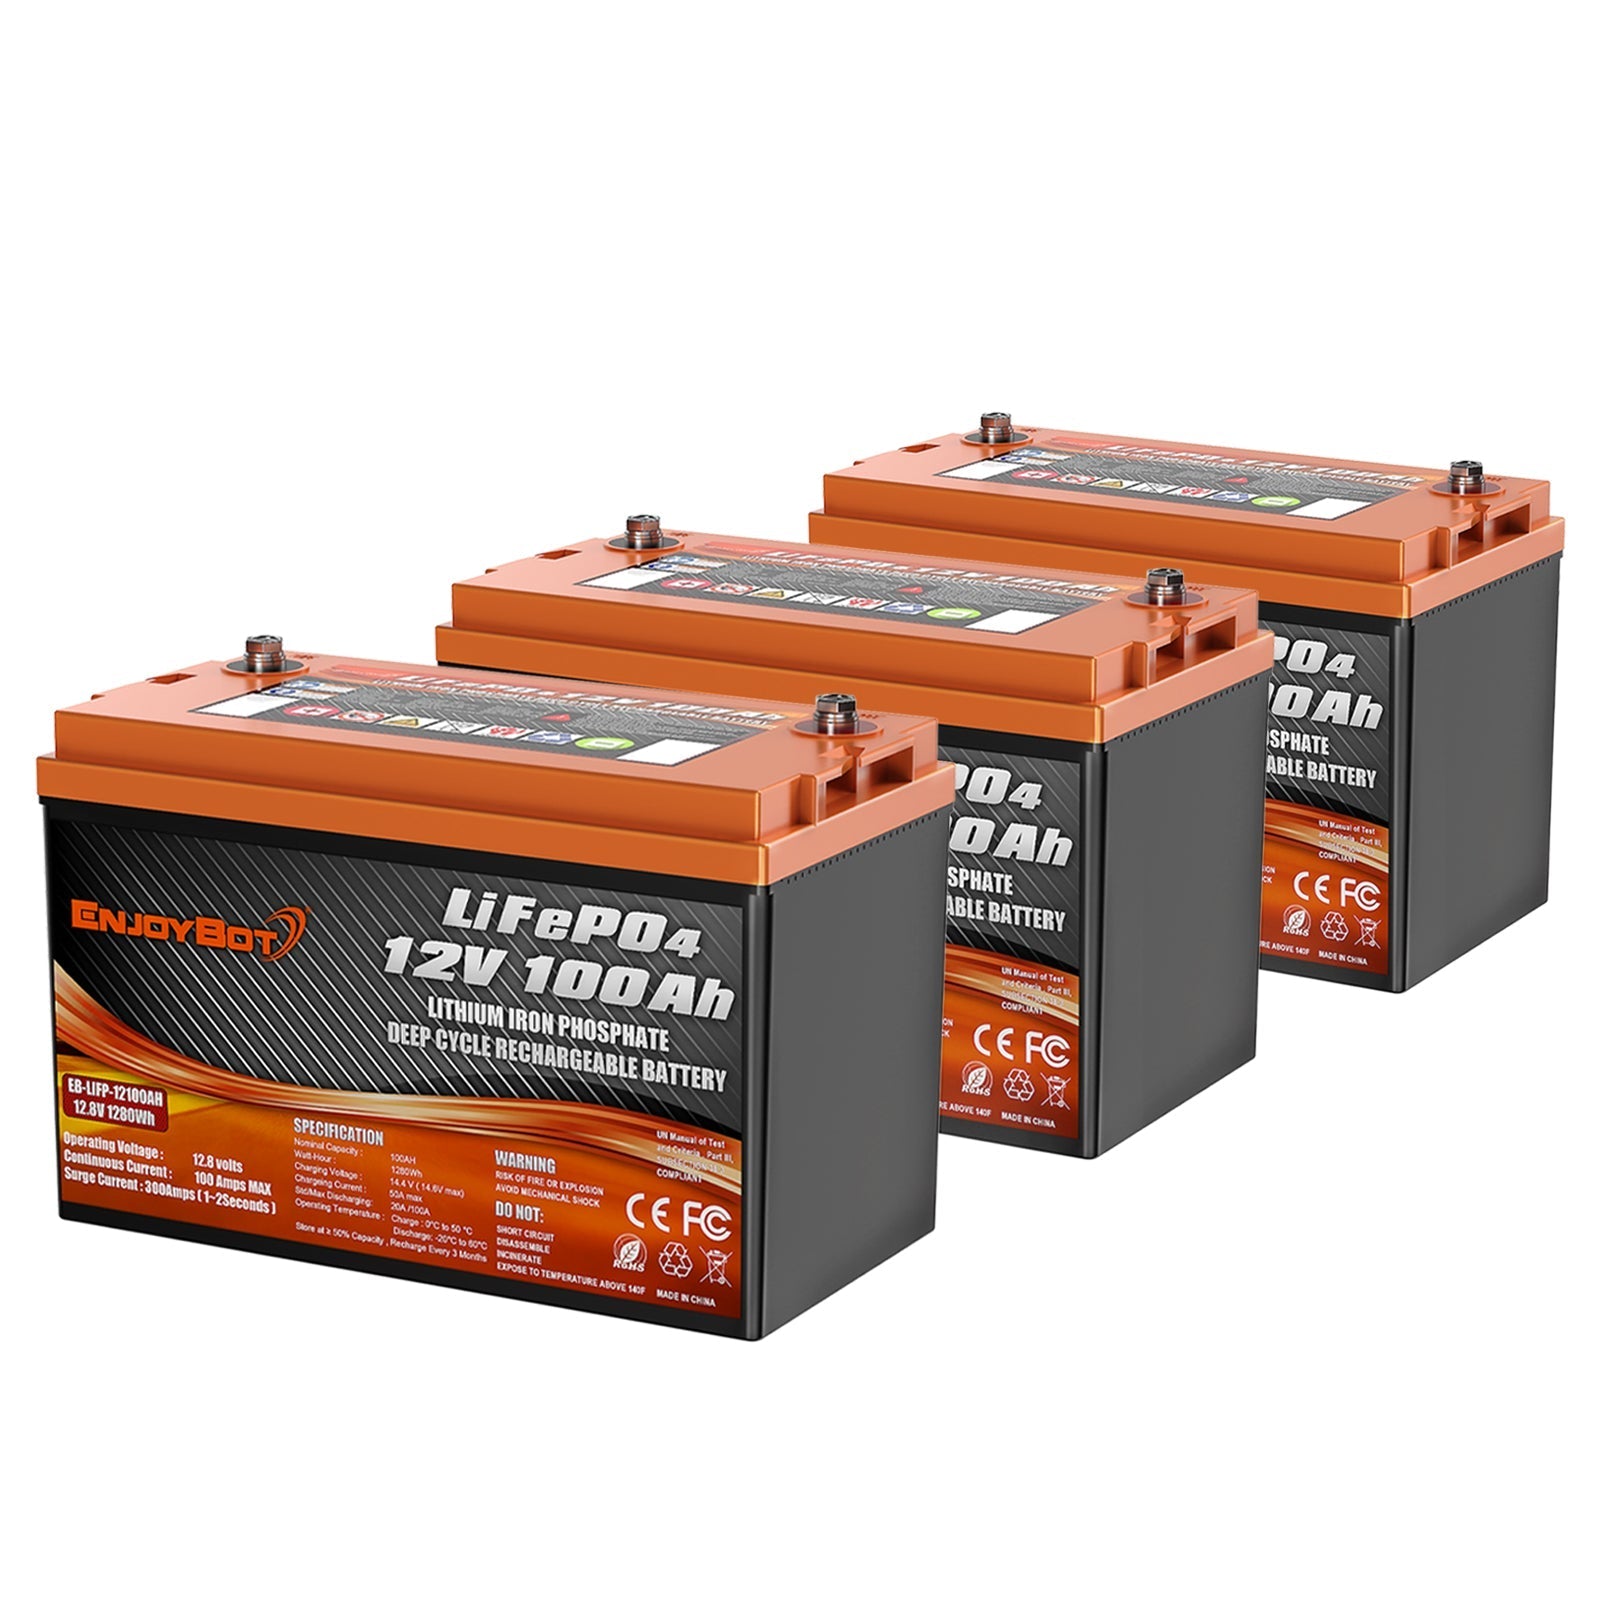 36v 100ah Lifepo4 battery with Grade A cells and perfect BMS deep cycle  times up to 10000 for Golf Cart trolling motor RV camping solar system home